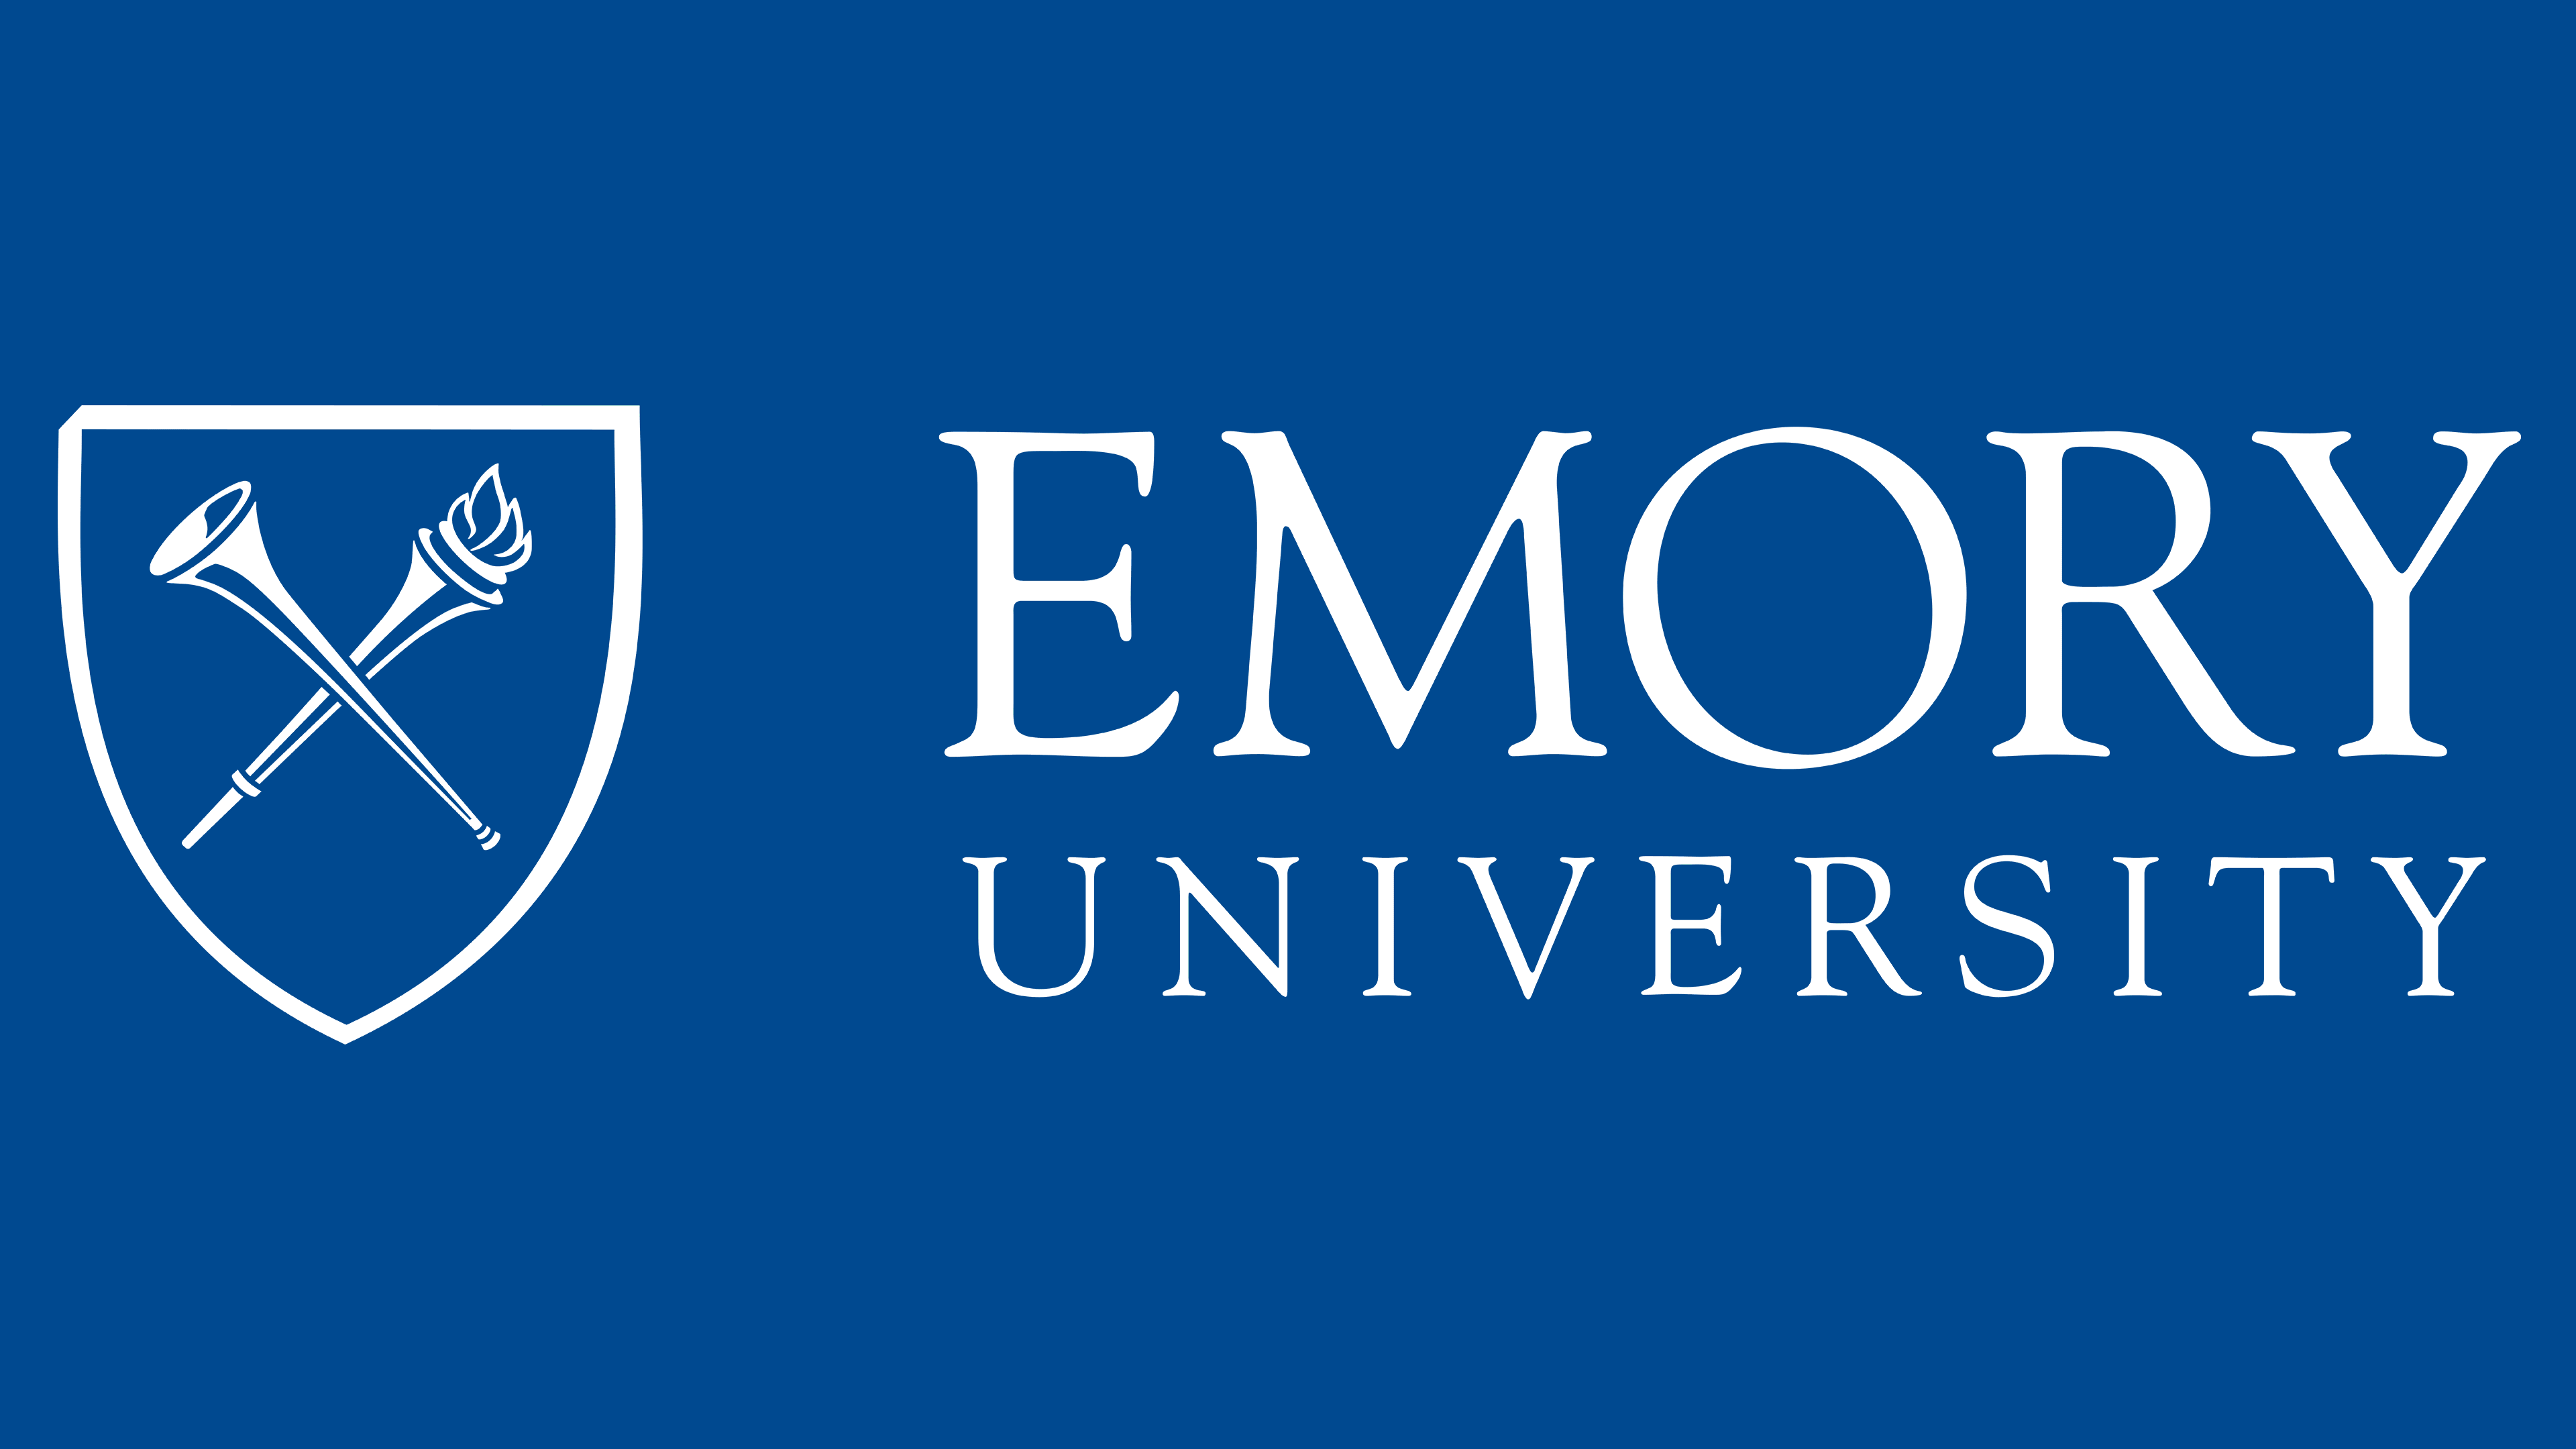 20 Fascinating Facts About Emory University - Facts.net